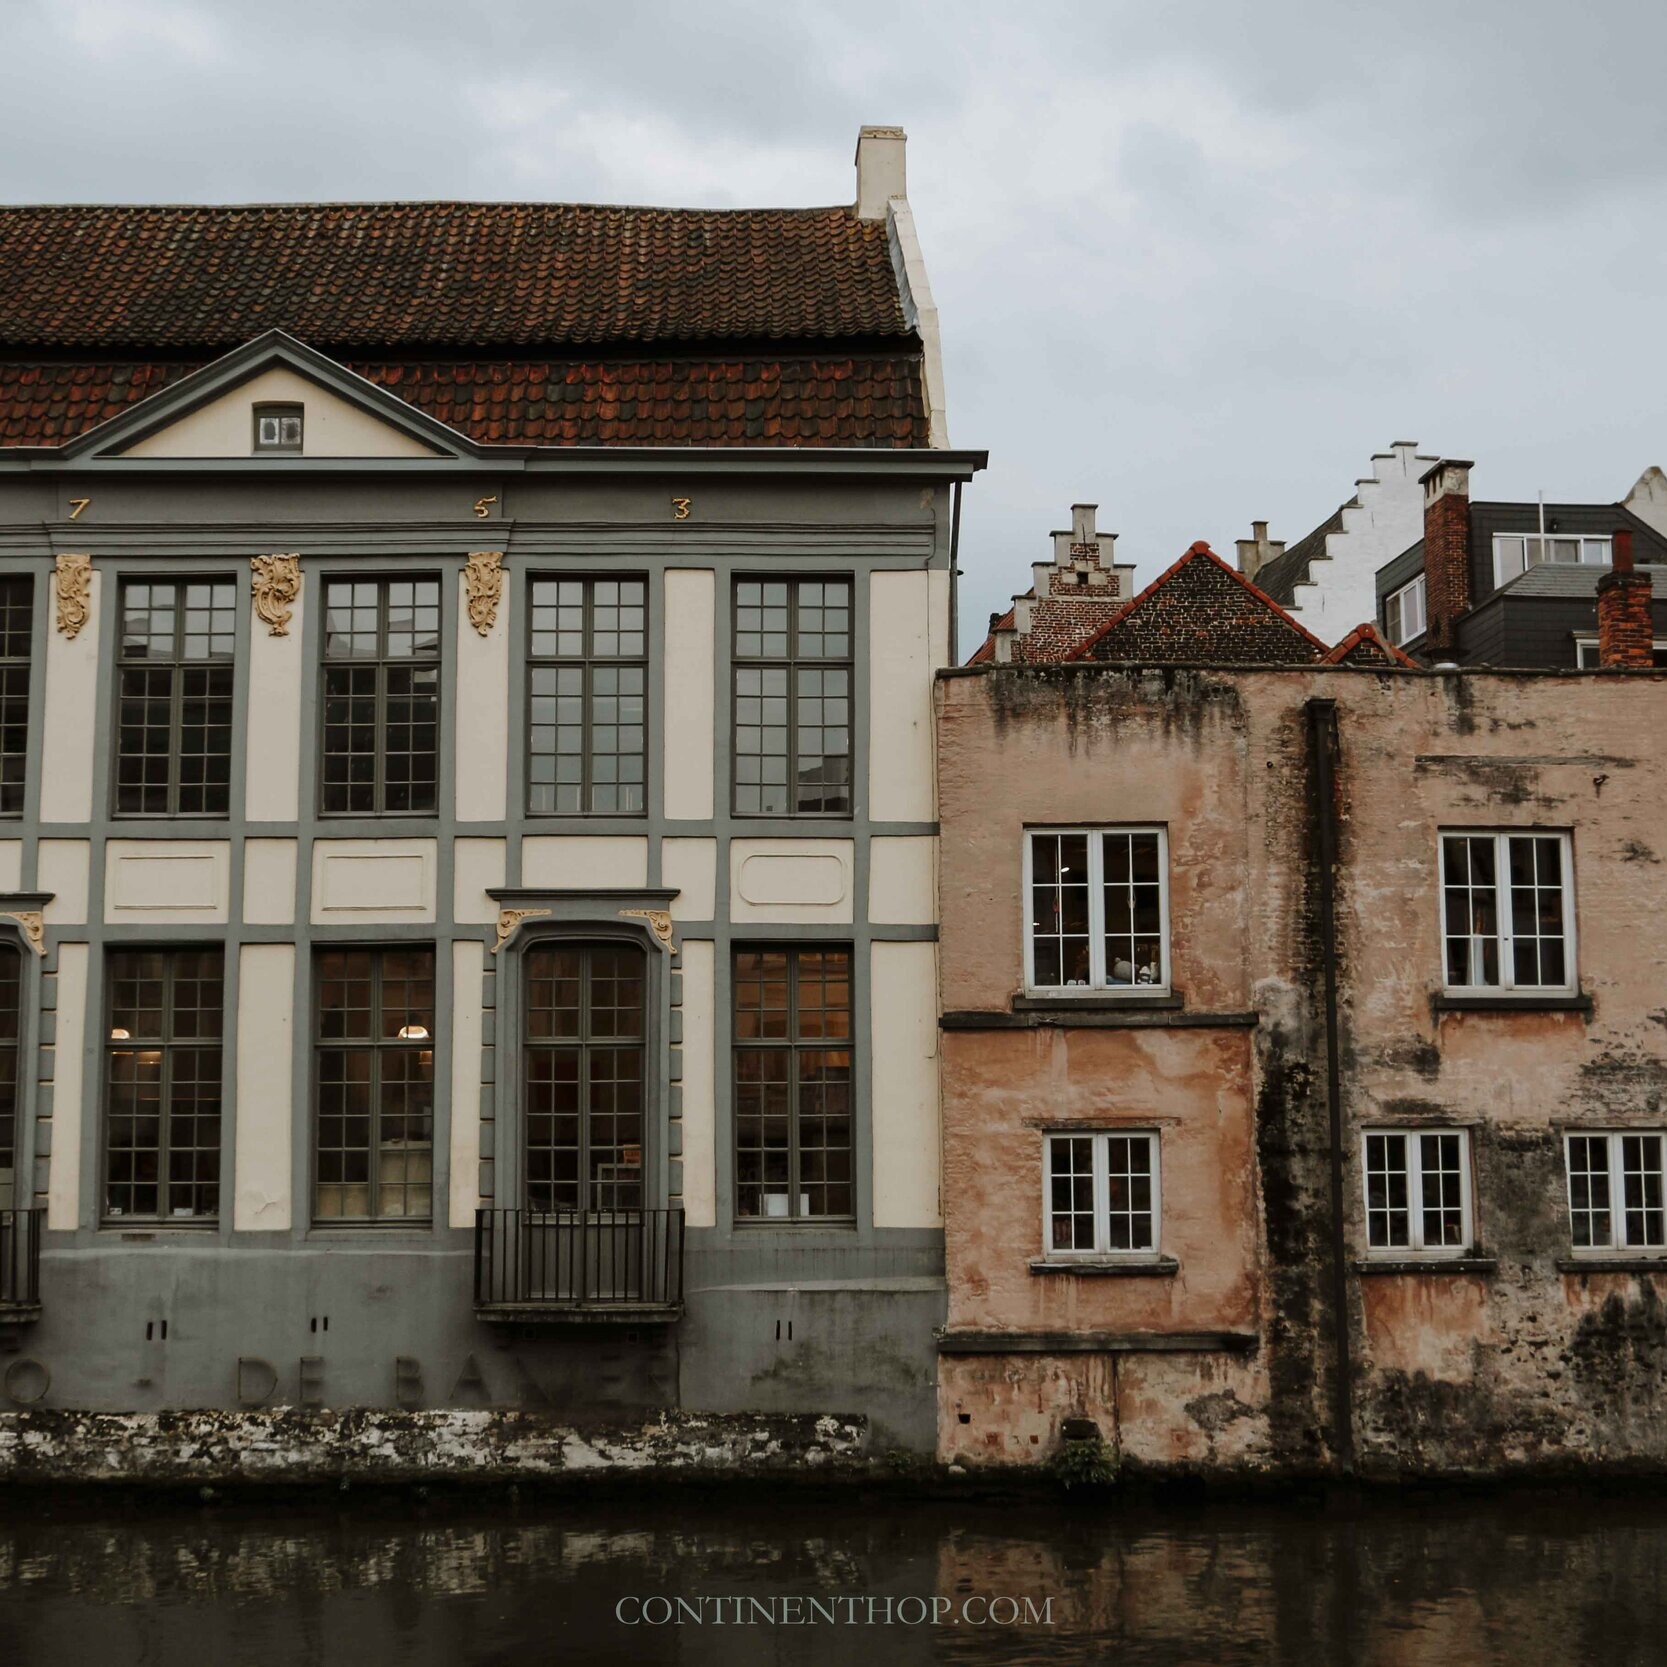 A building with beautiful architecture by the river Leie in Ghent